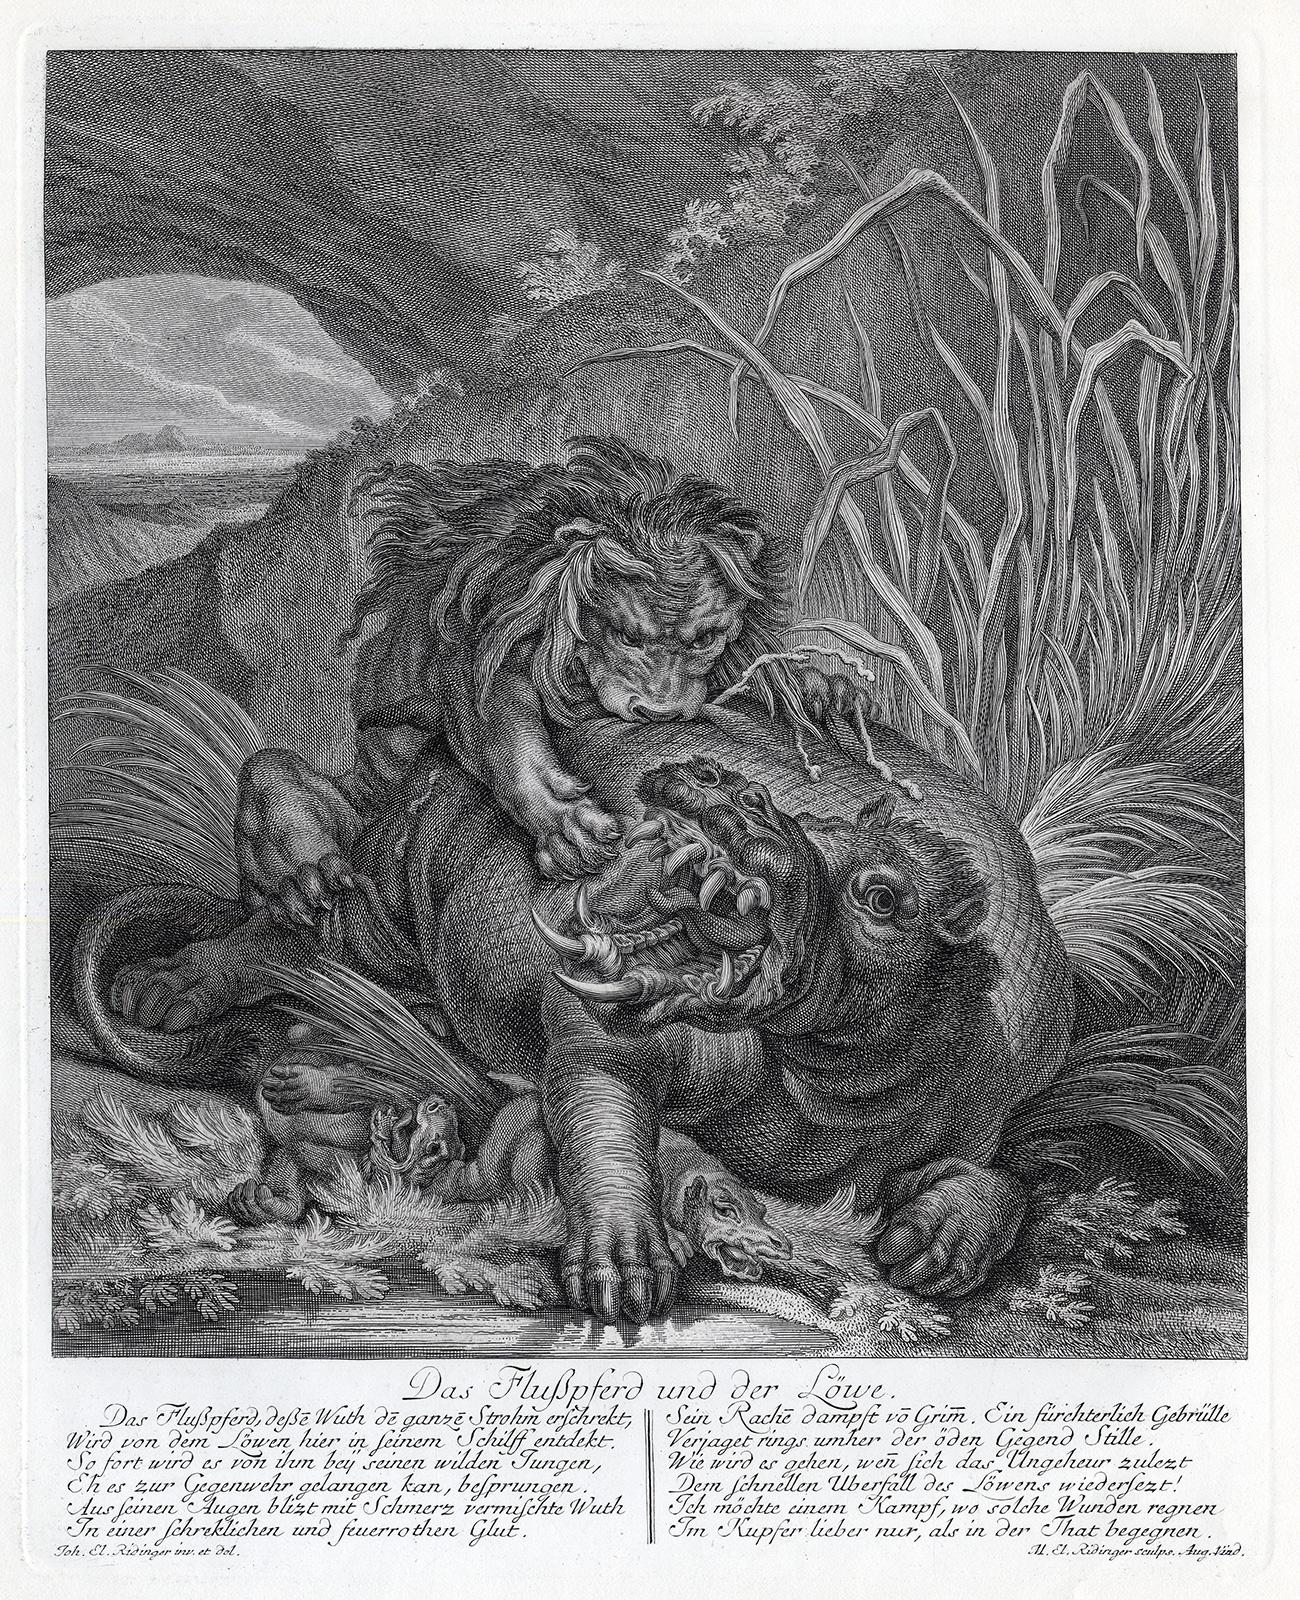 Martin Elias Ridinger Landscape Print - Hunting scene with a lion jumping a hippo by Ridinger - Engraving - 18th c